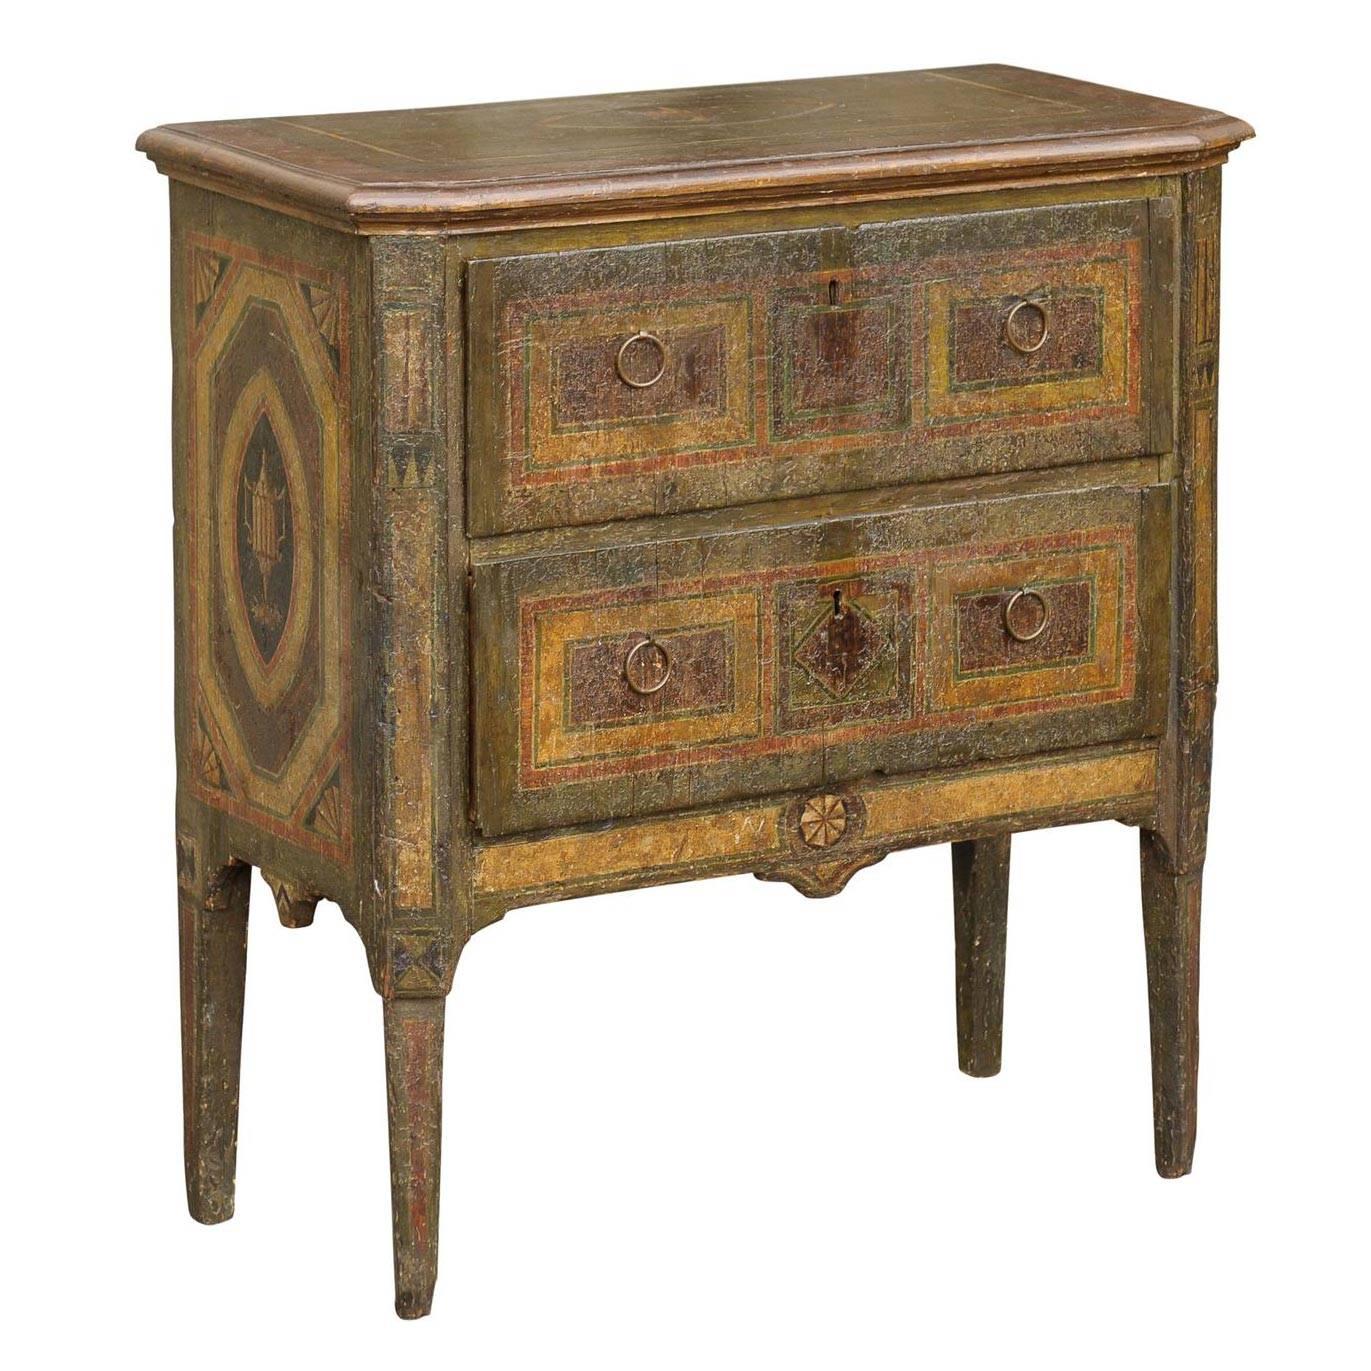 Italian Two-Drawer Commode with Rich Distressed Paint from the Early 1800s